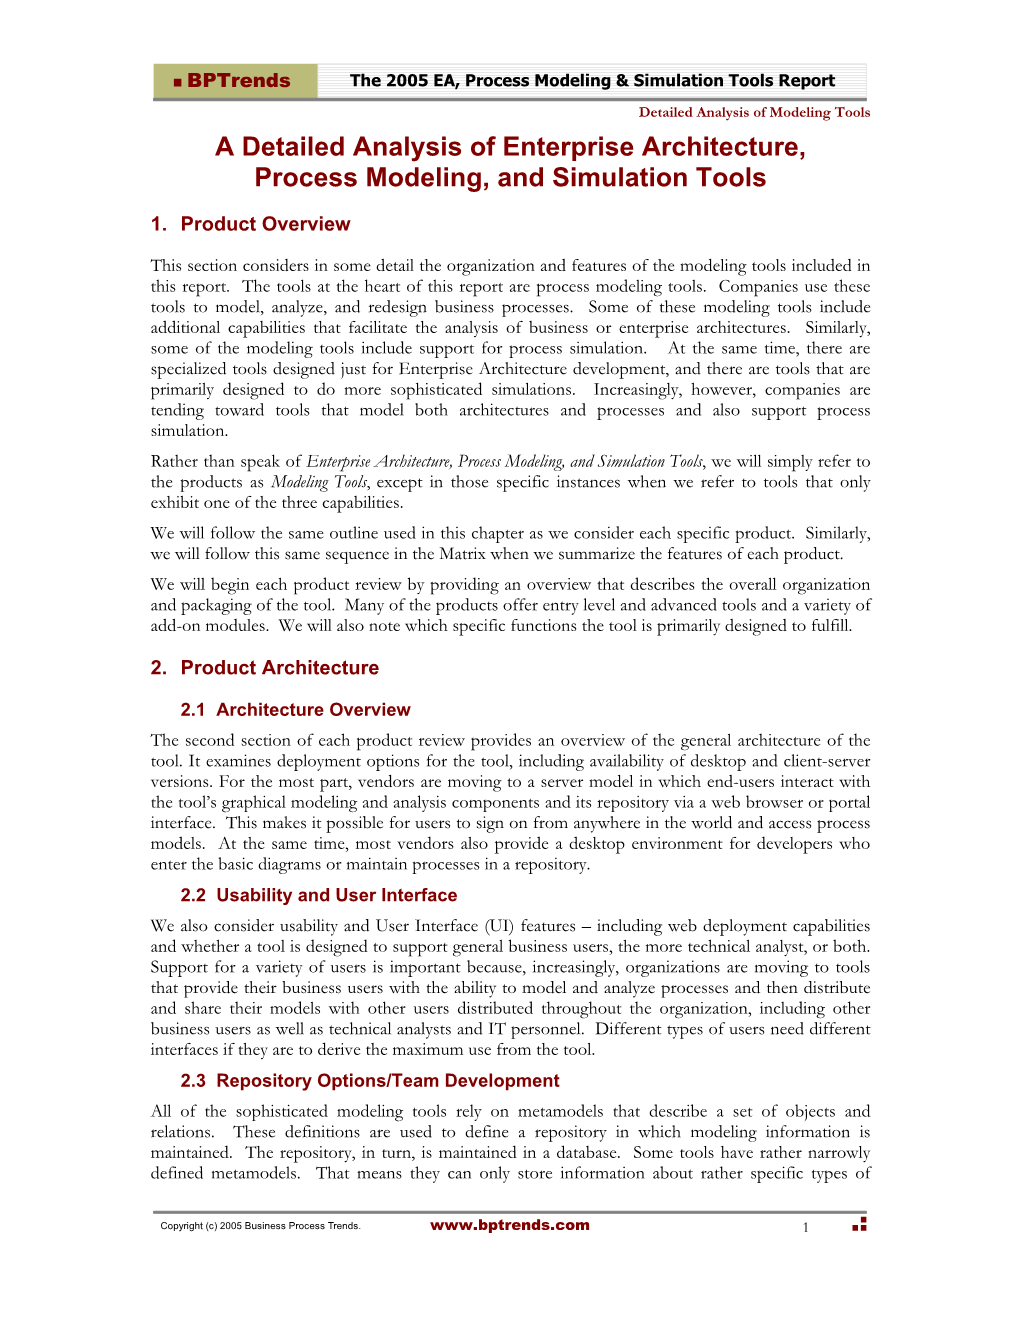 A Detailed Analysis of Enterprise Architecture, Process Modeling, and Simulation Tools